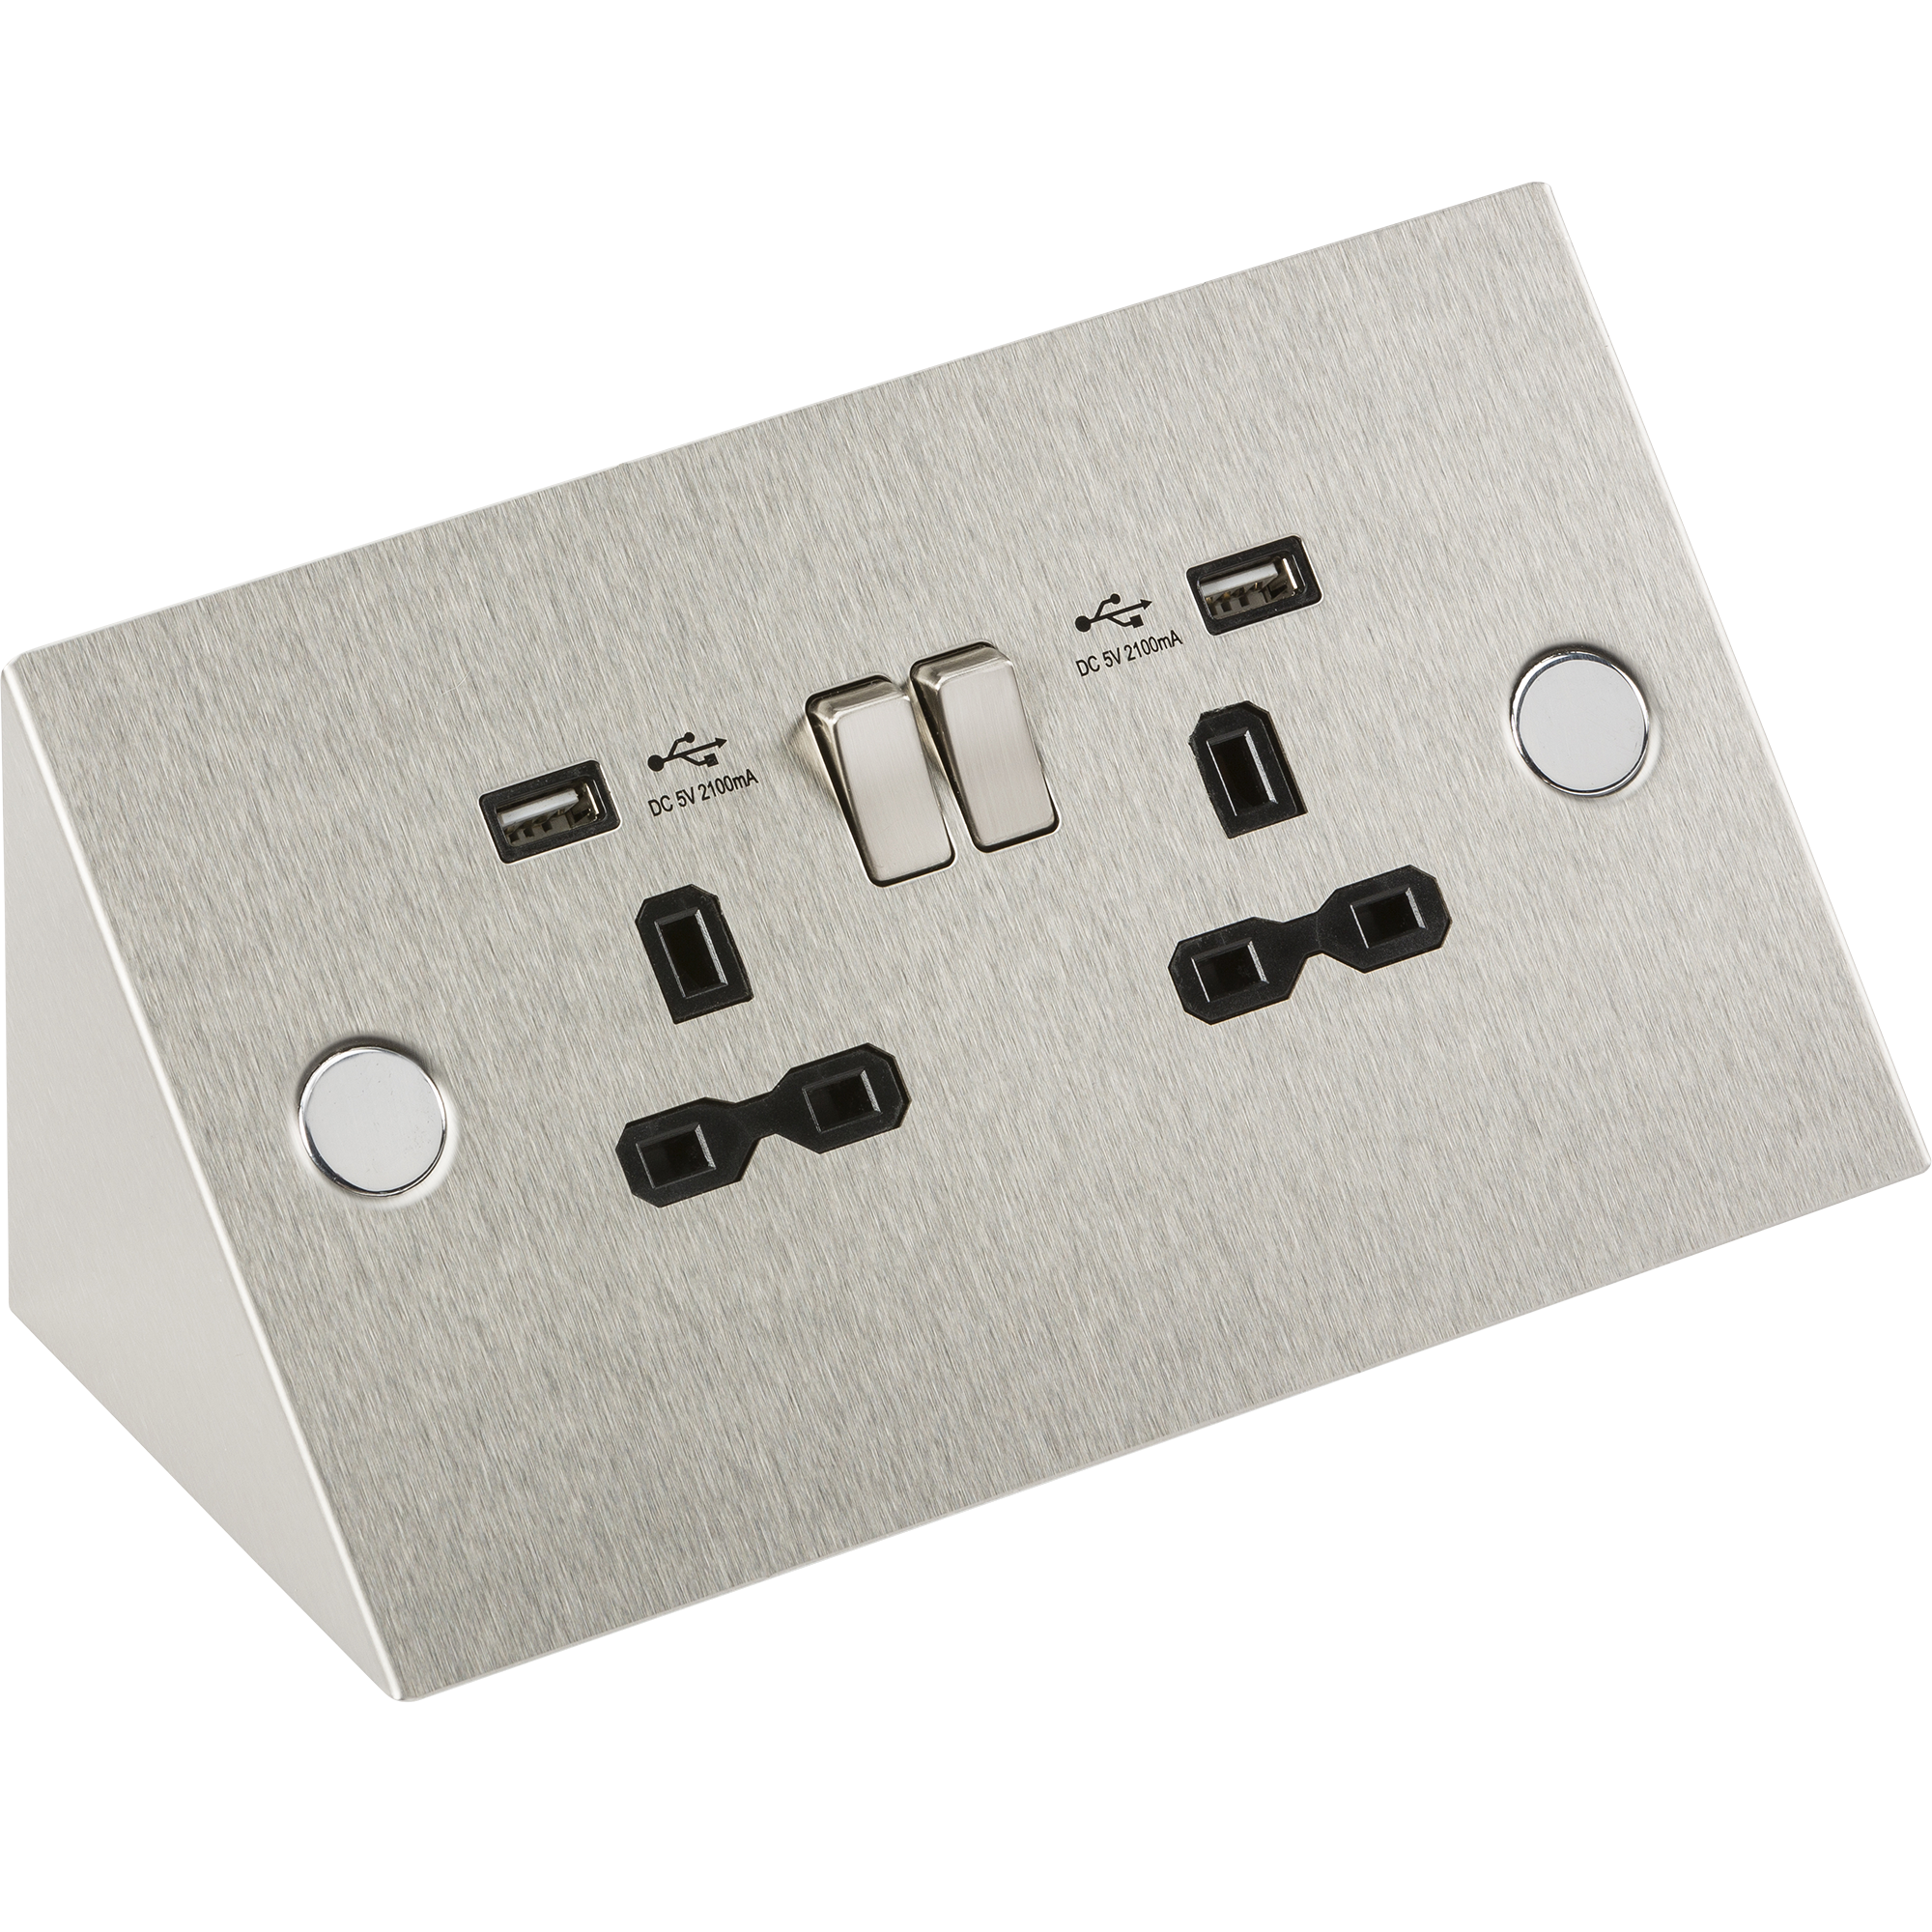 13A 2G Mounting Switched Socket With Dual USB Charger (2.1A) - Stainless Steel With Black Insert - SKR002 